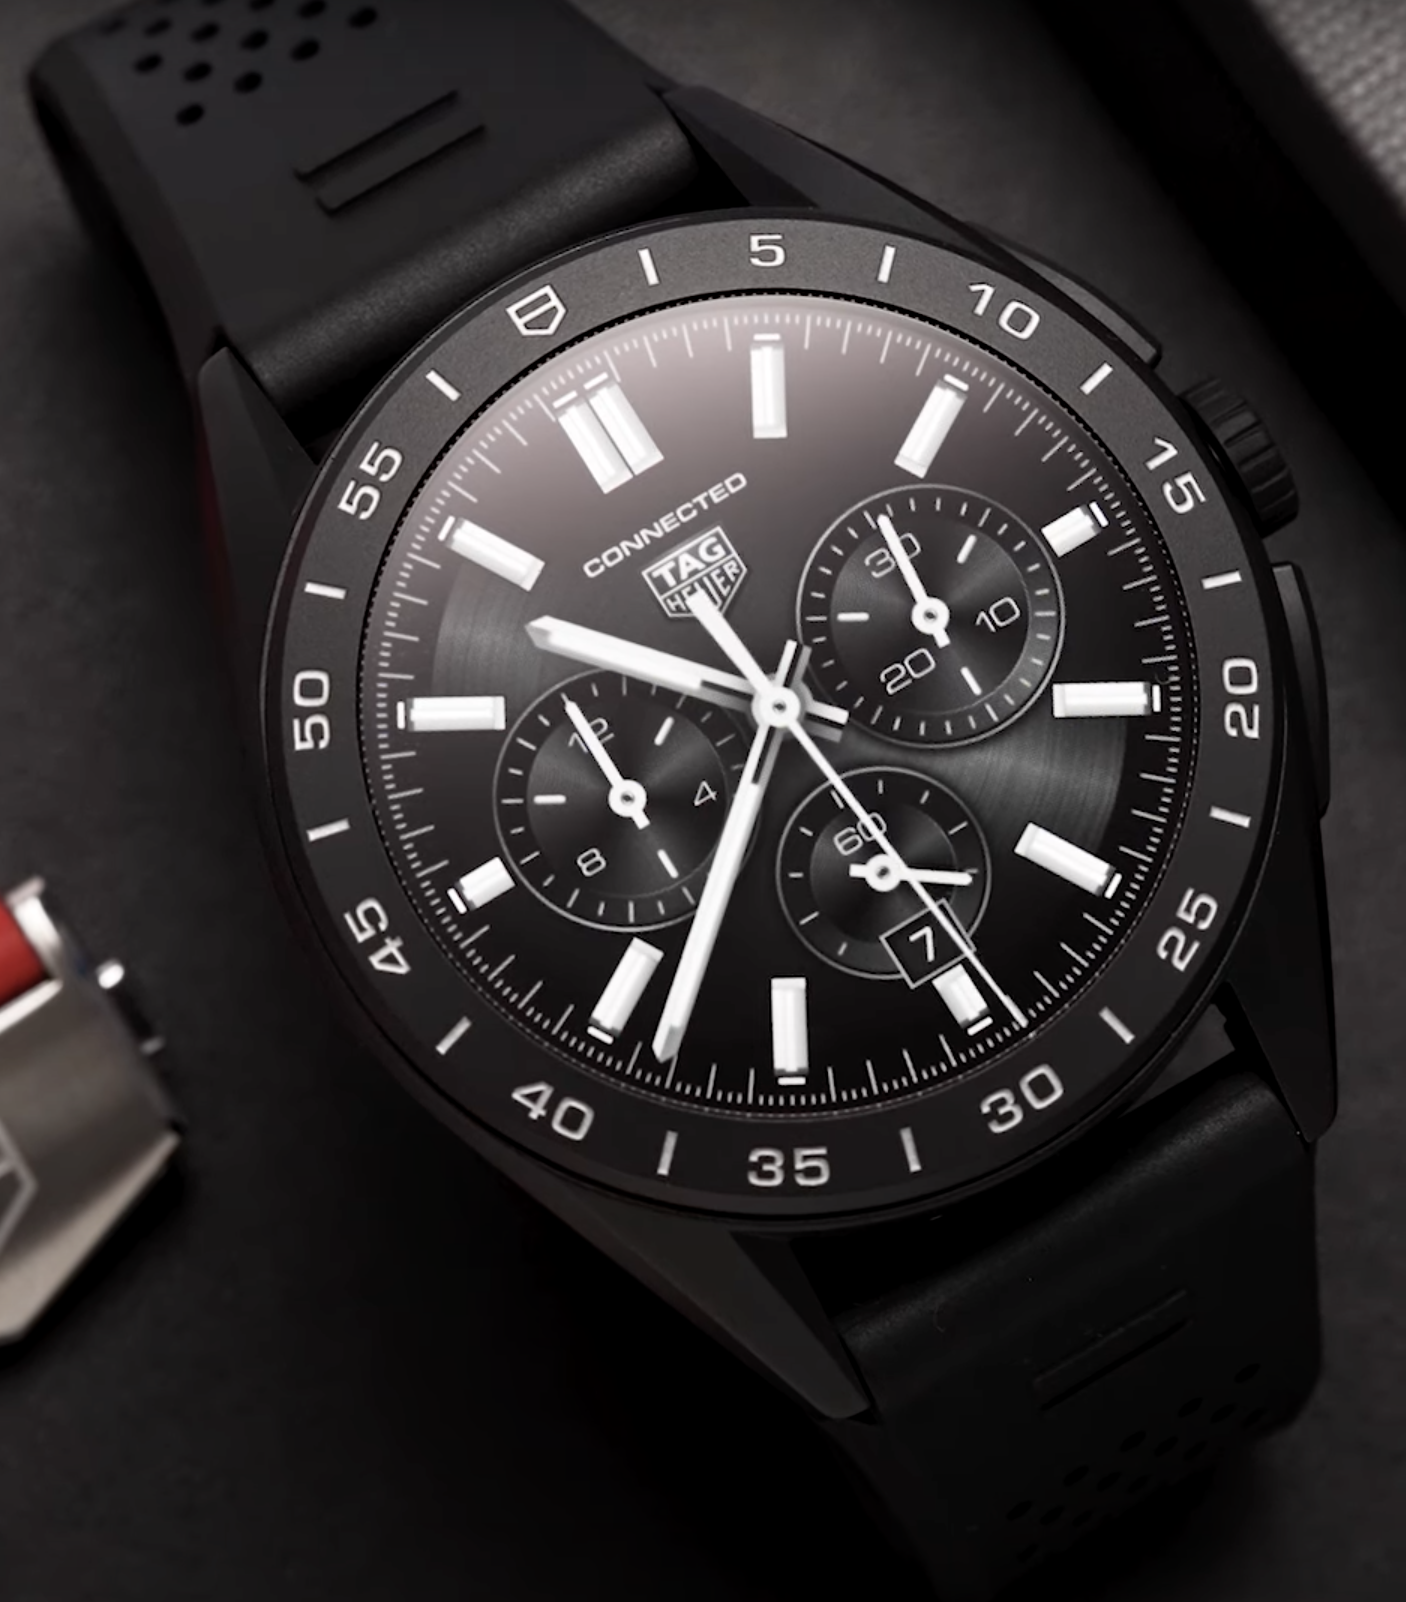 The TAG Heuer Connected 42mm is the biggest leap forward for Swiss